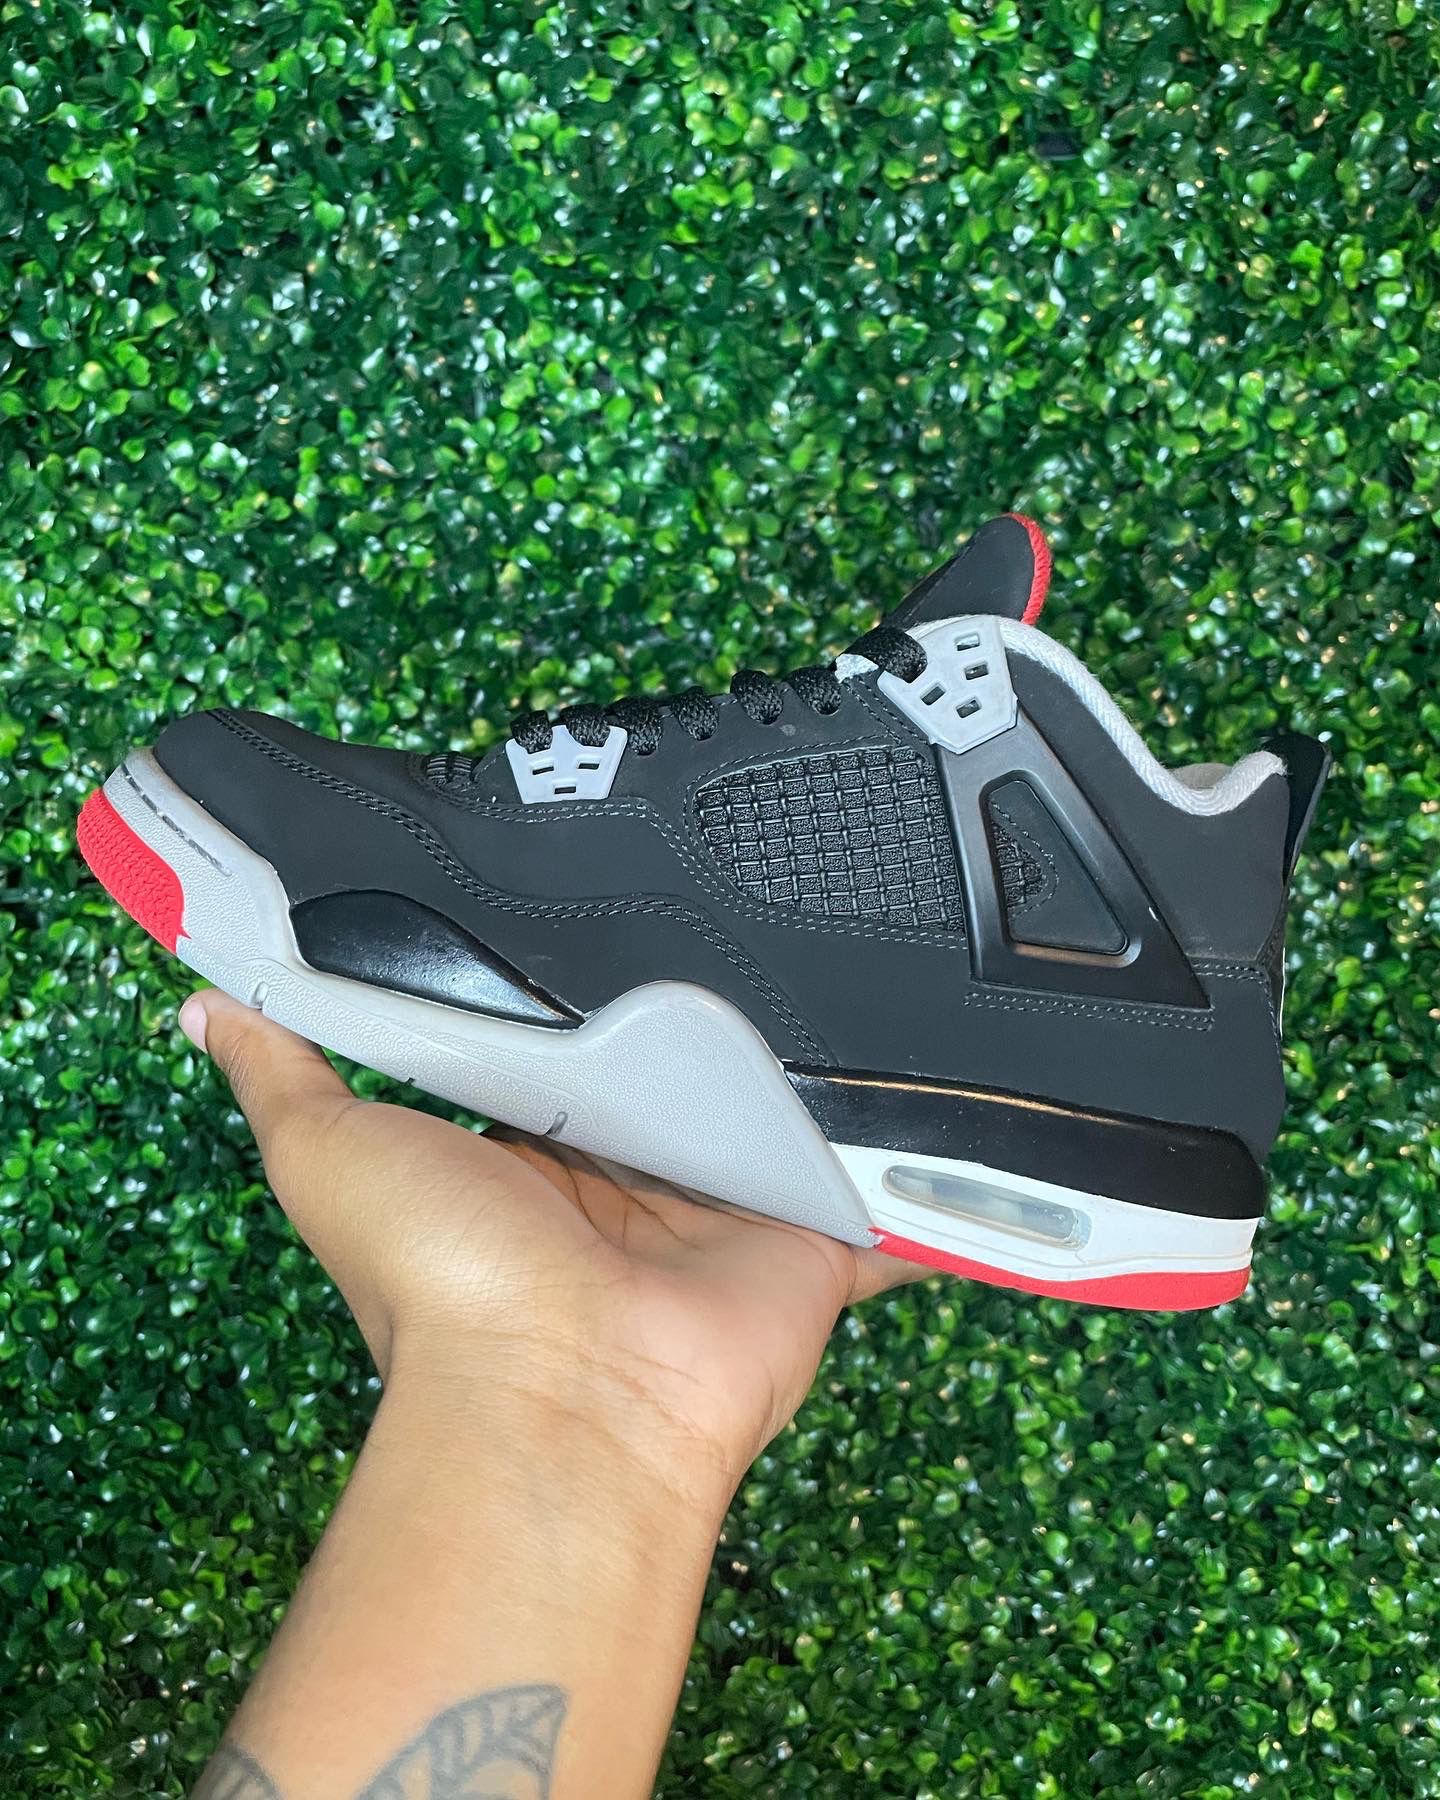 Bred 4s